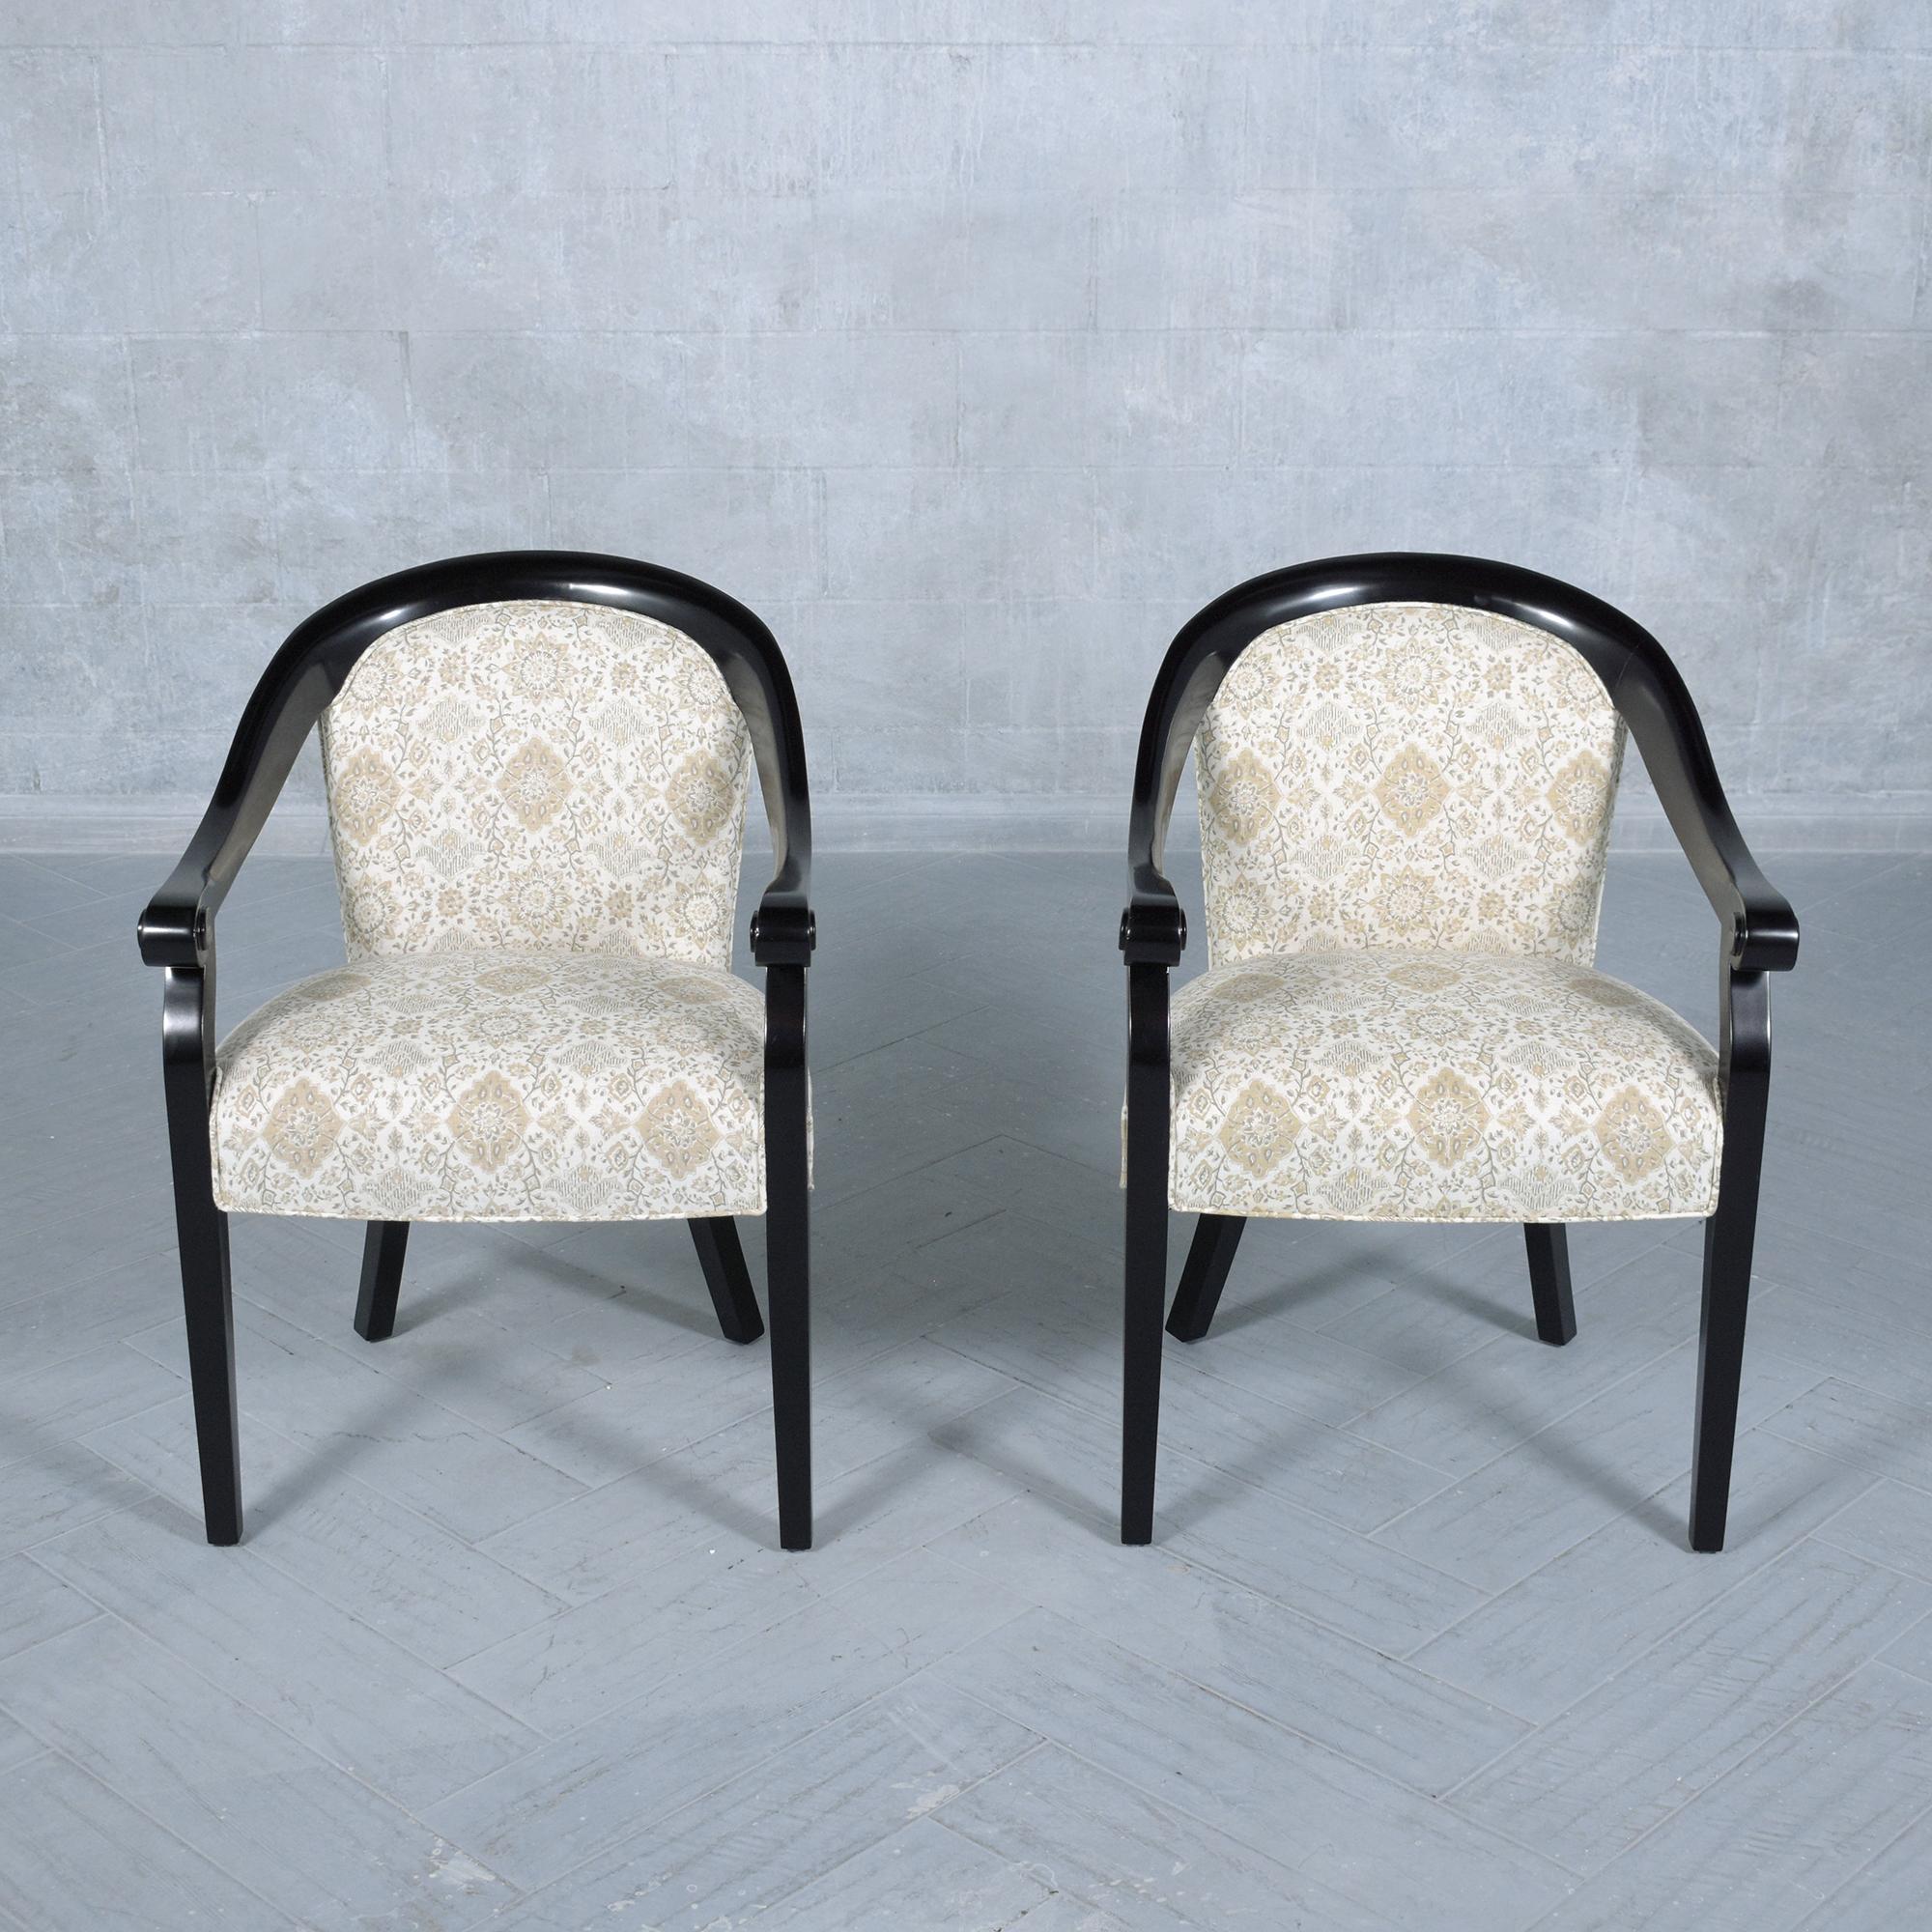 1960s Hickory Modern Black Lacquered Armchairs with Patterned Linen Upholstery For Sale 1